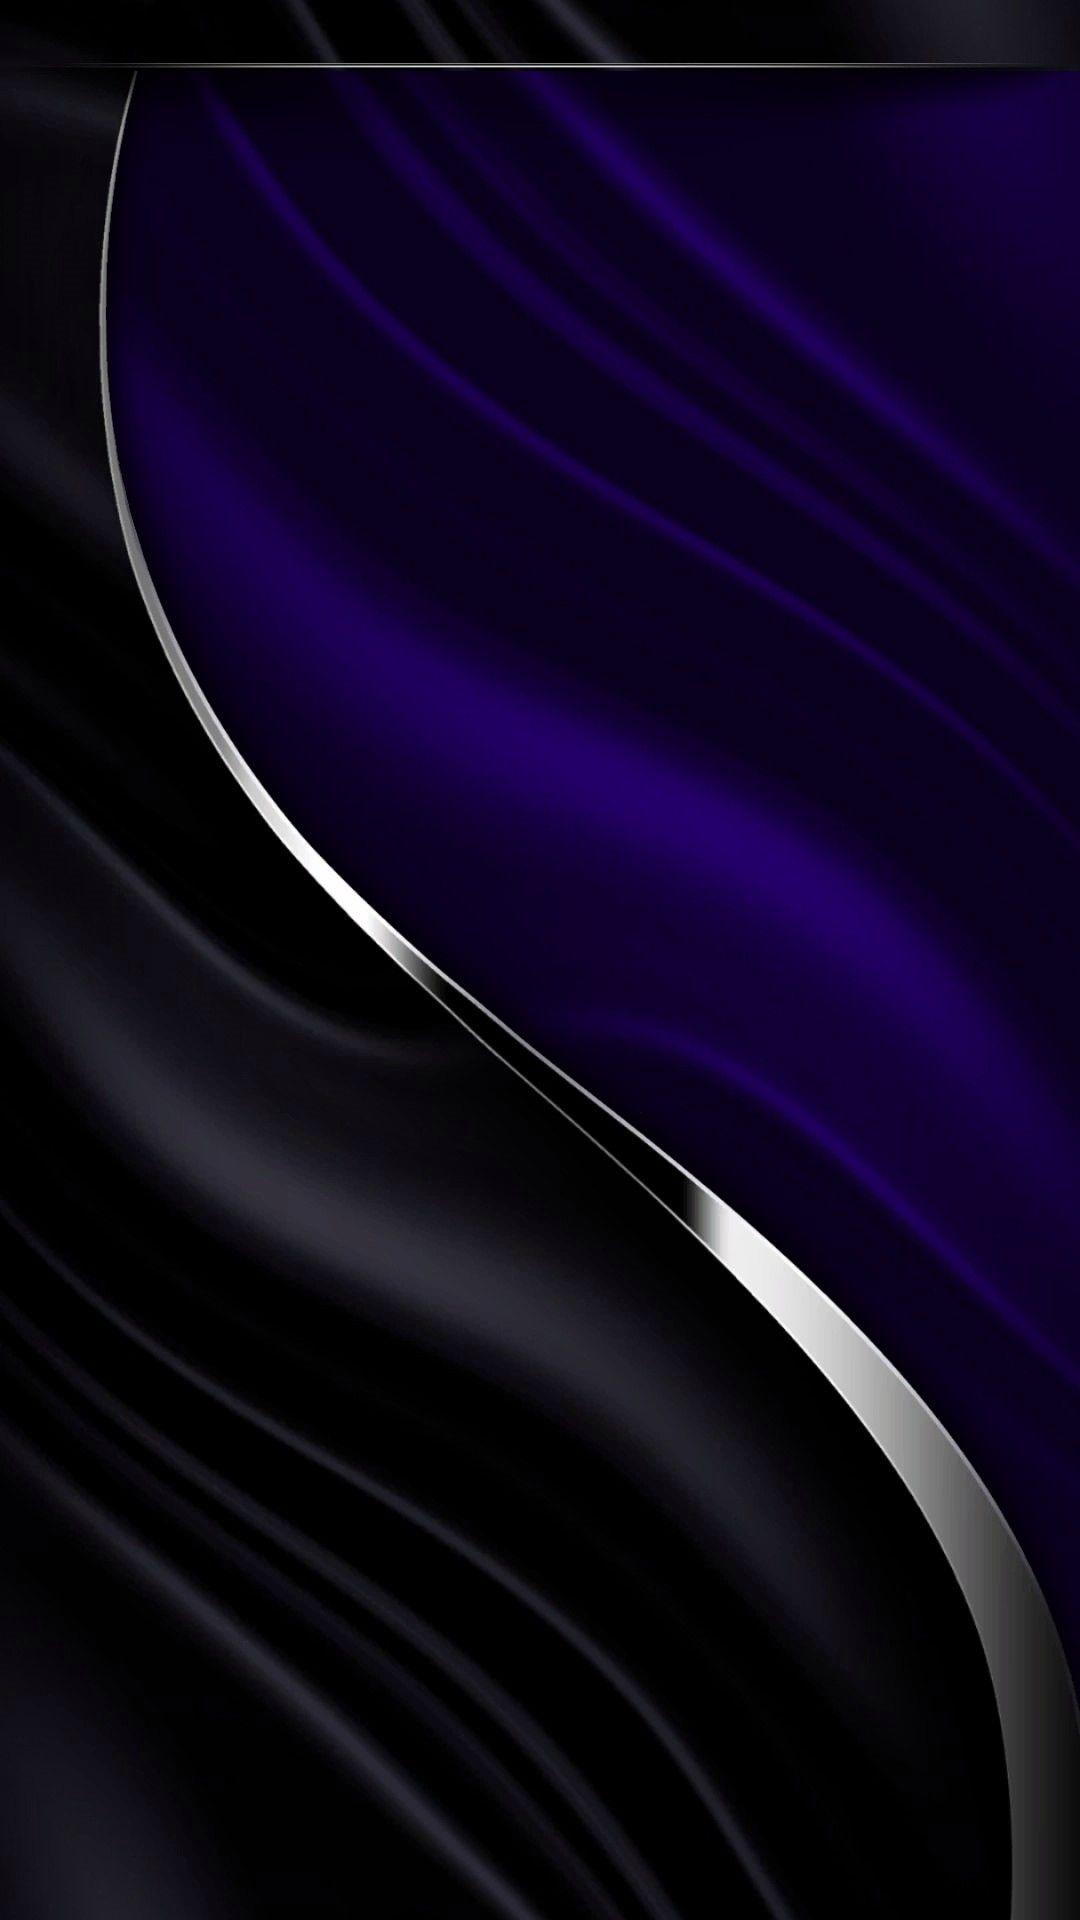 Black & Blue & Silver, too. Abstract iphone wallpaper, Abstract